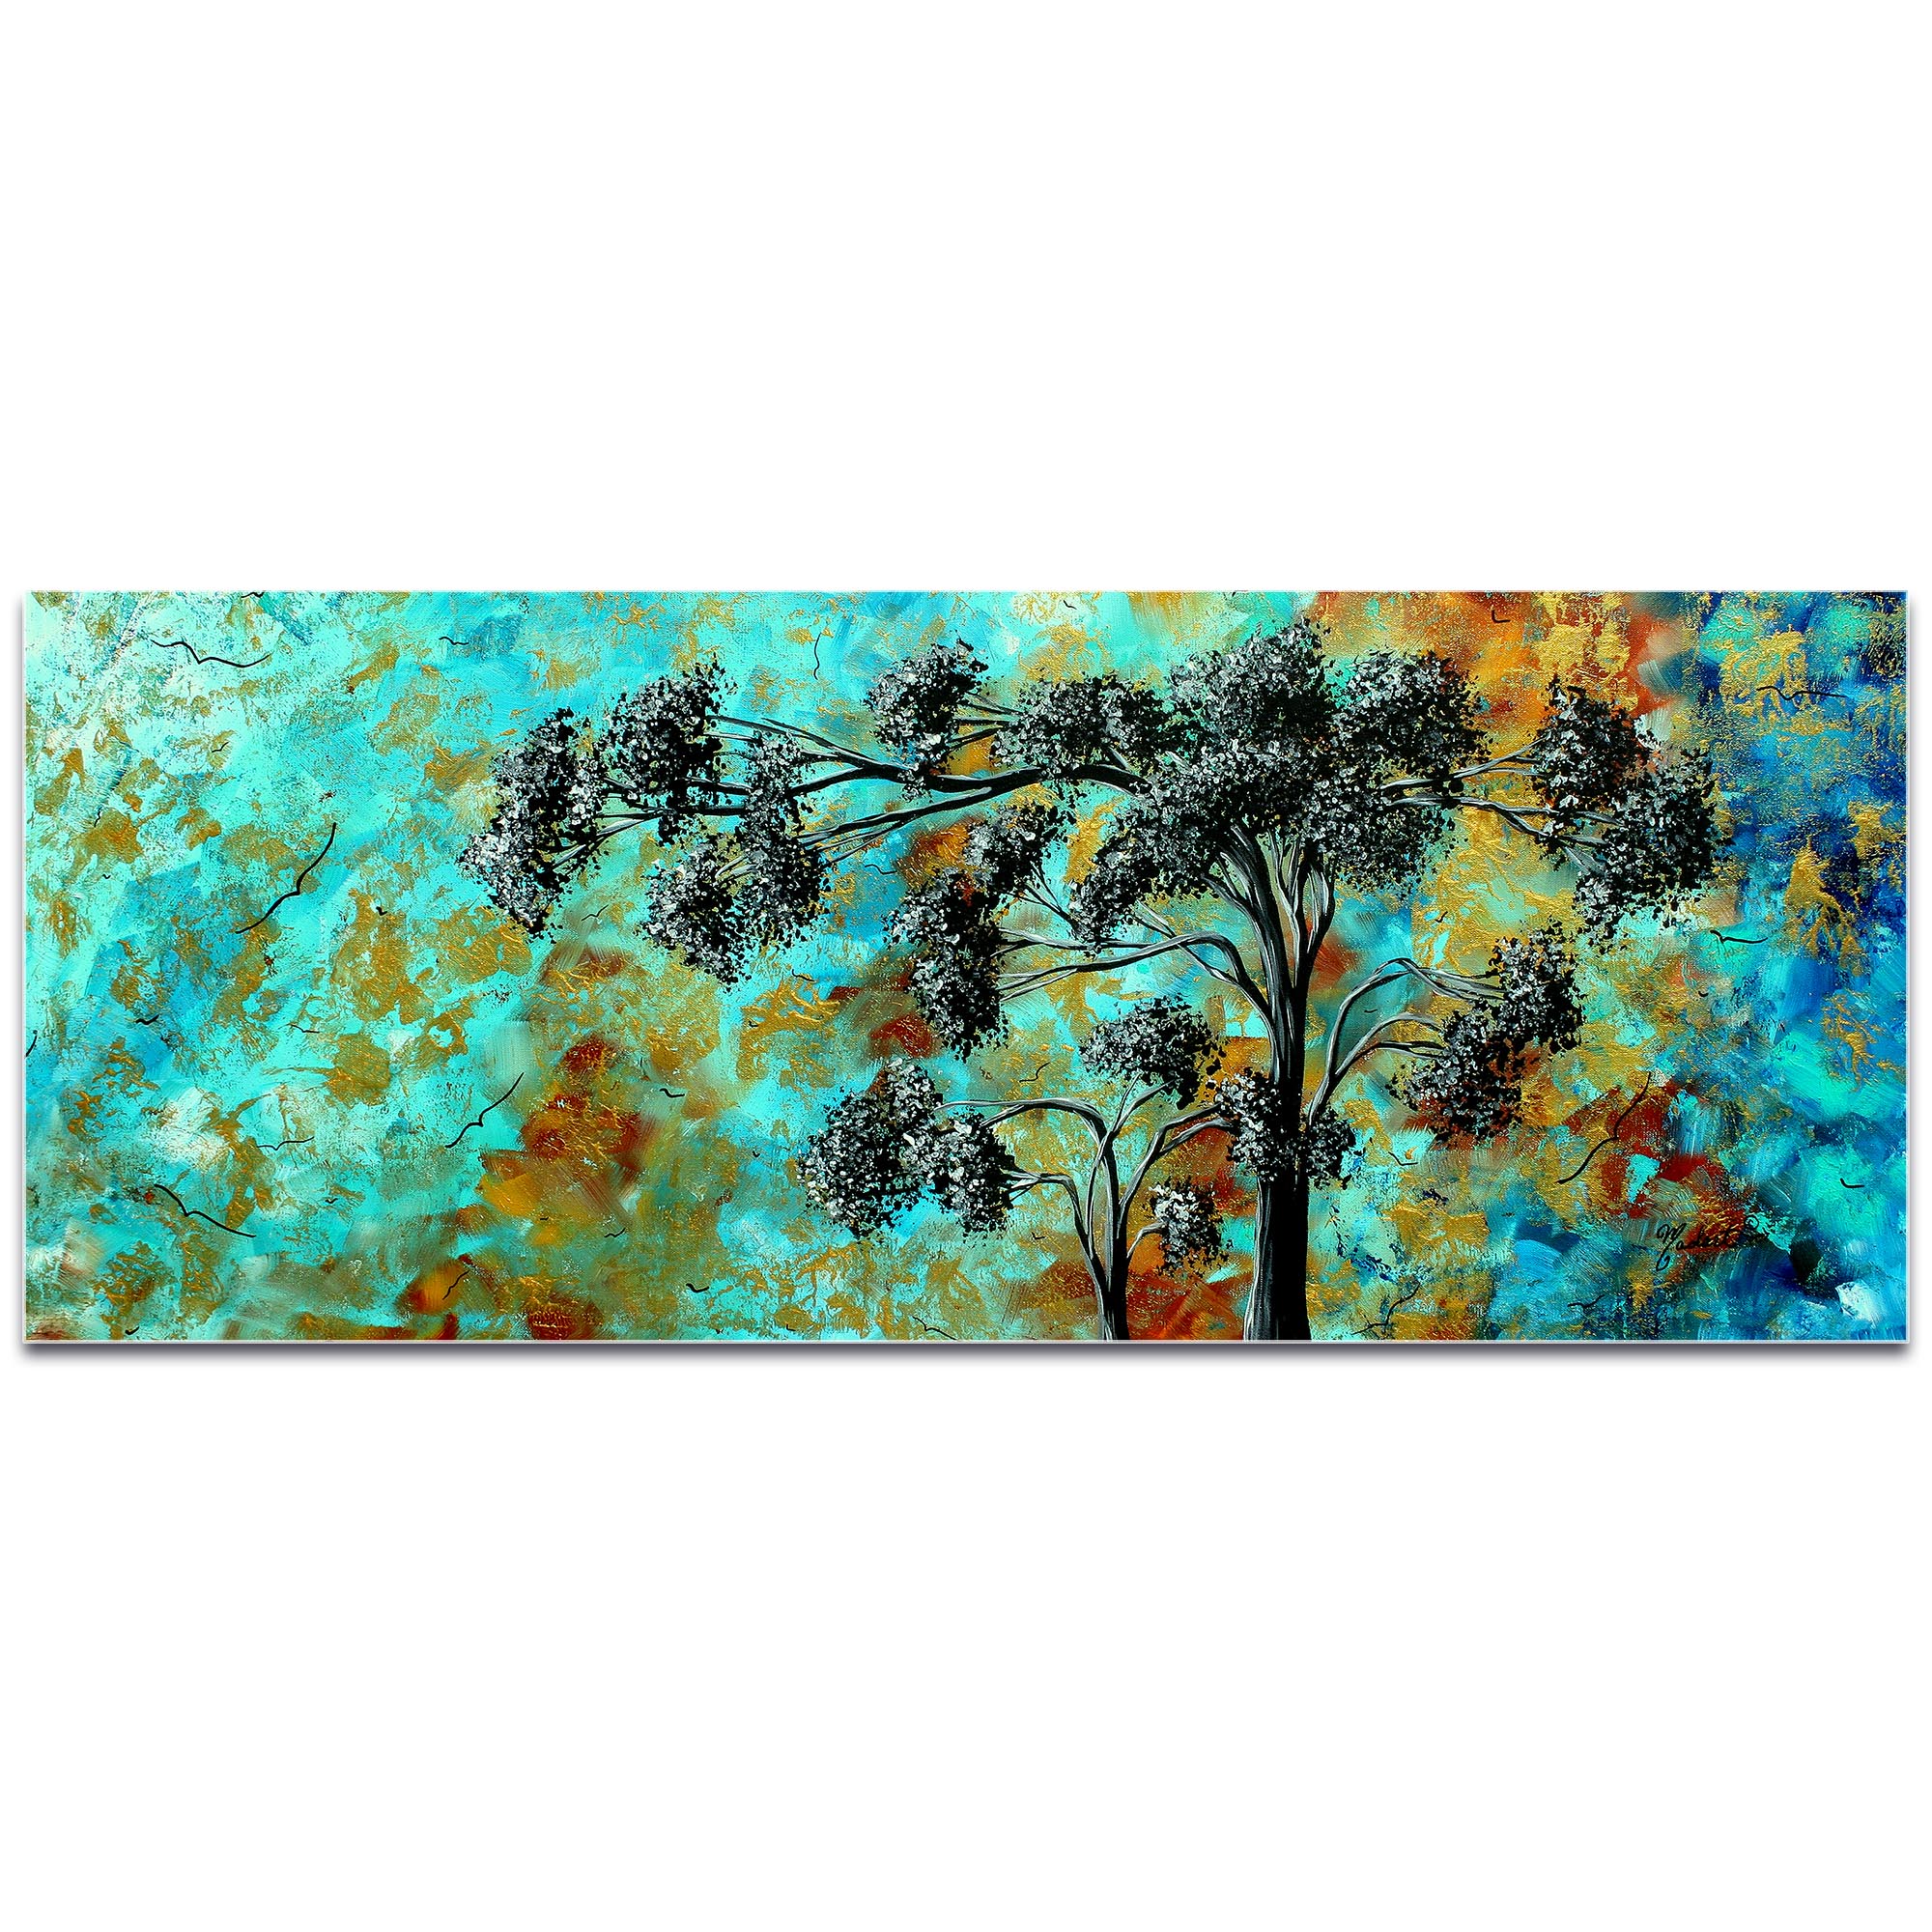 Landscape Painting 'Spring Blooms' - Abstract Tree Art on Metal or Acrylic - Image 2